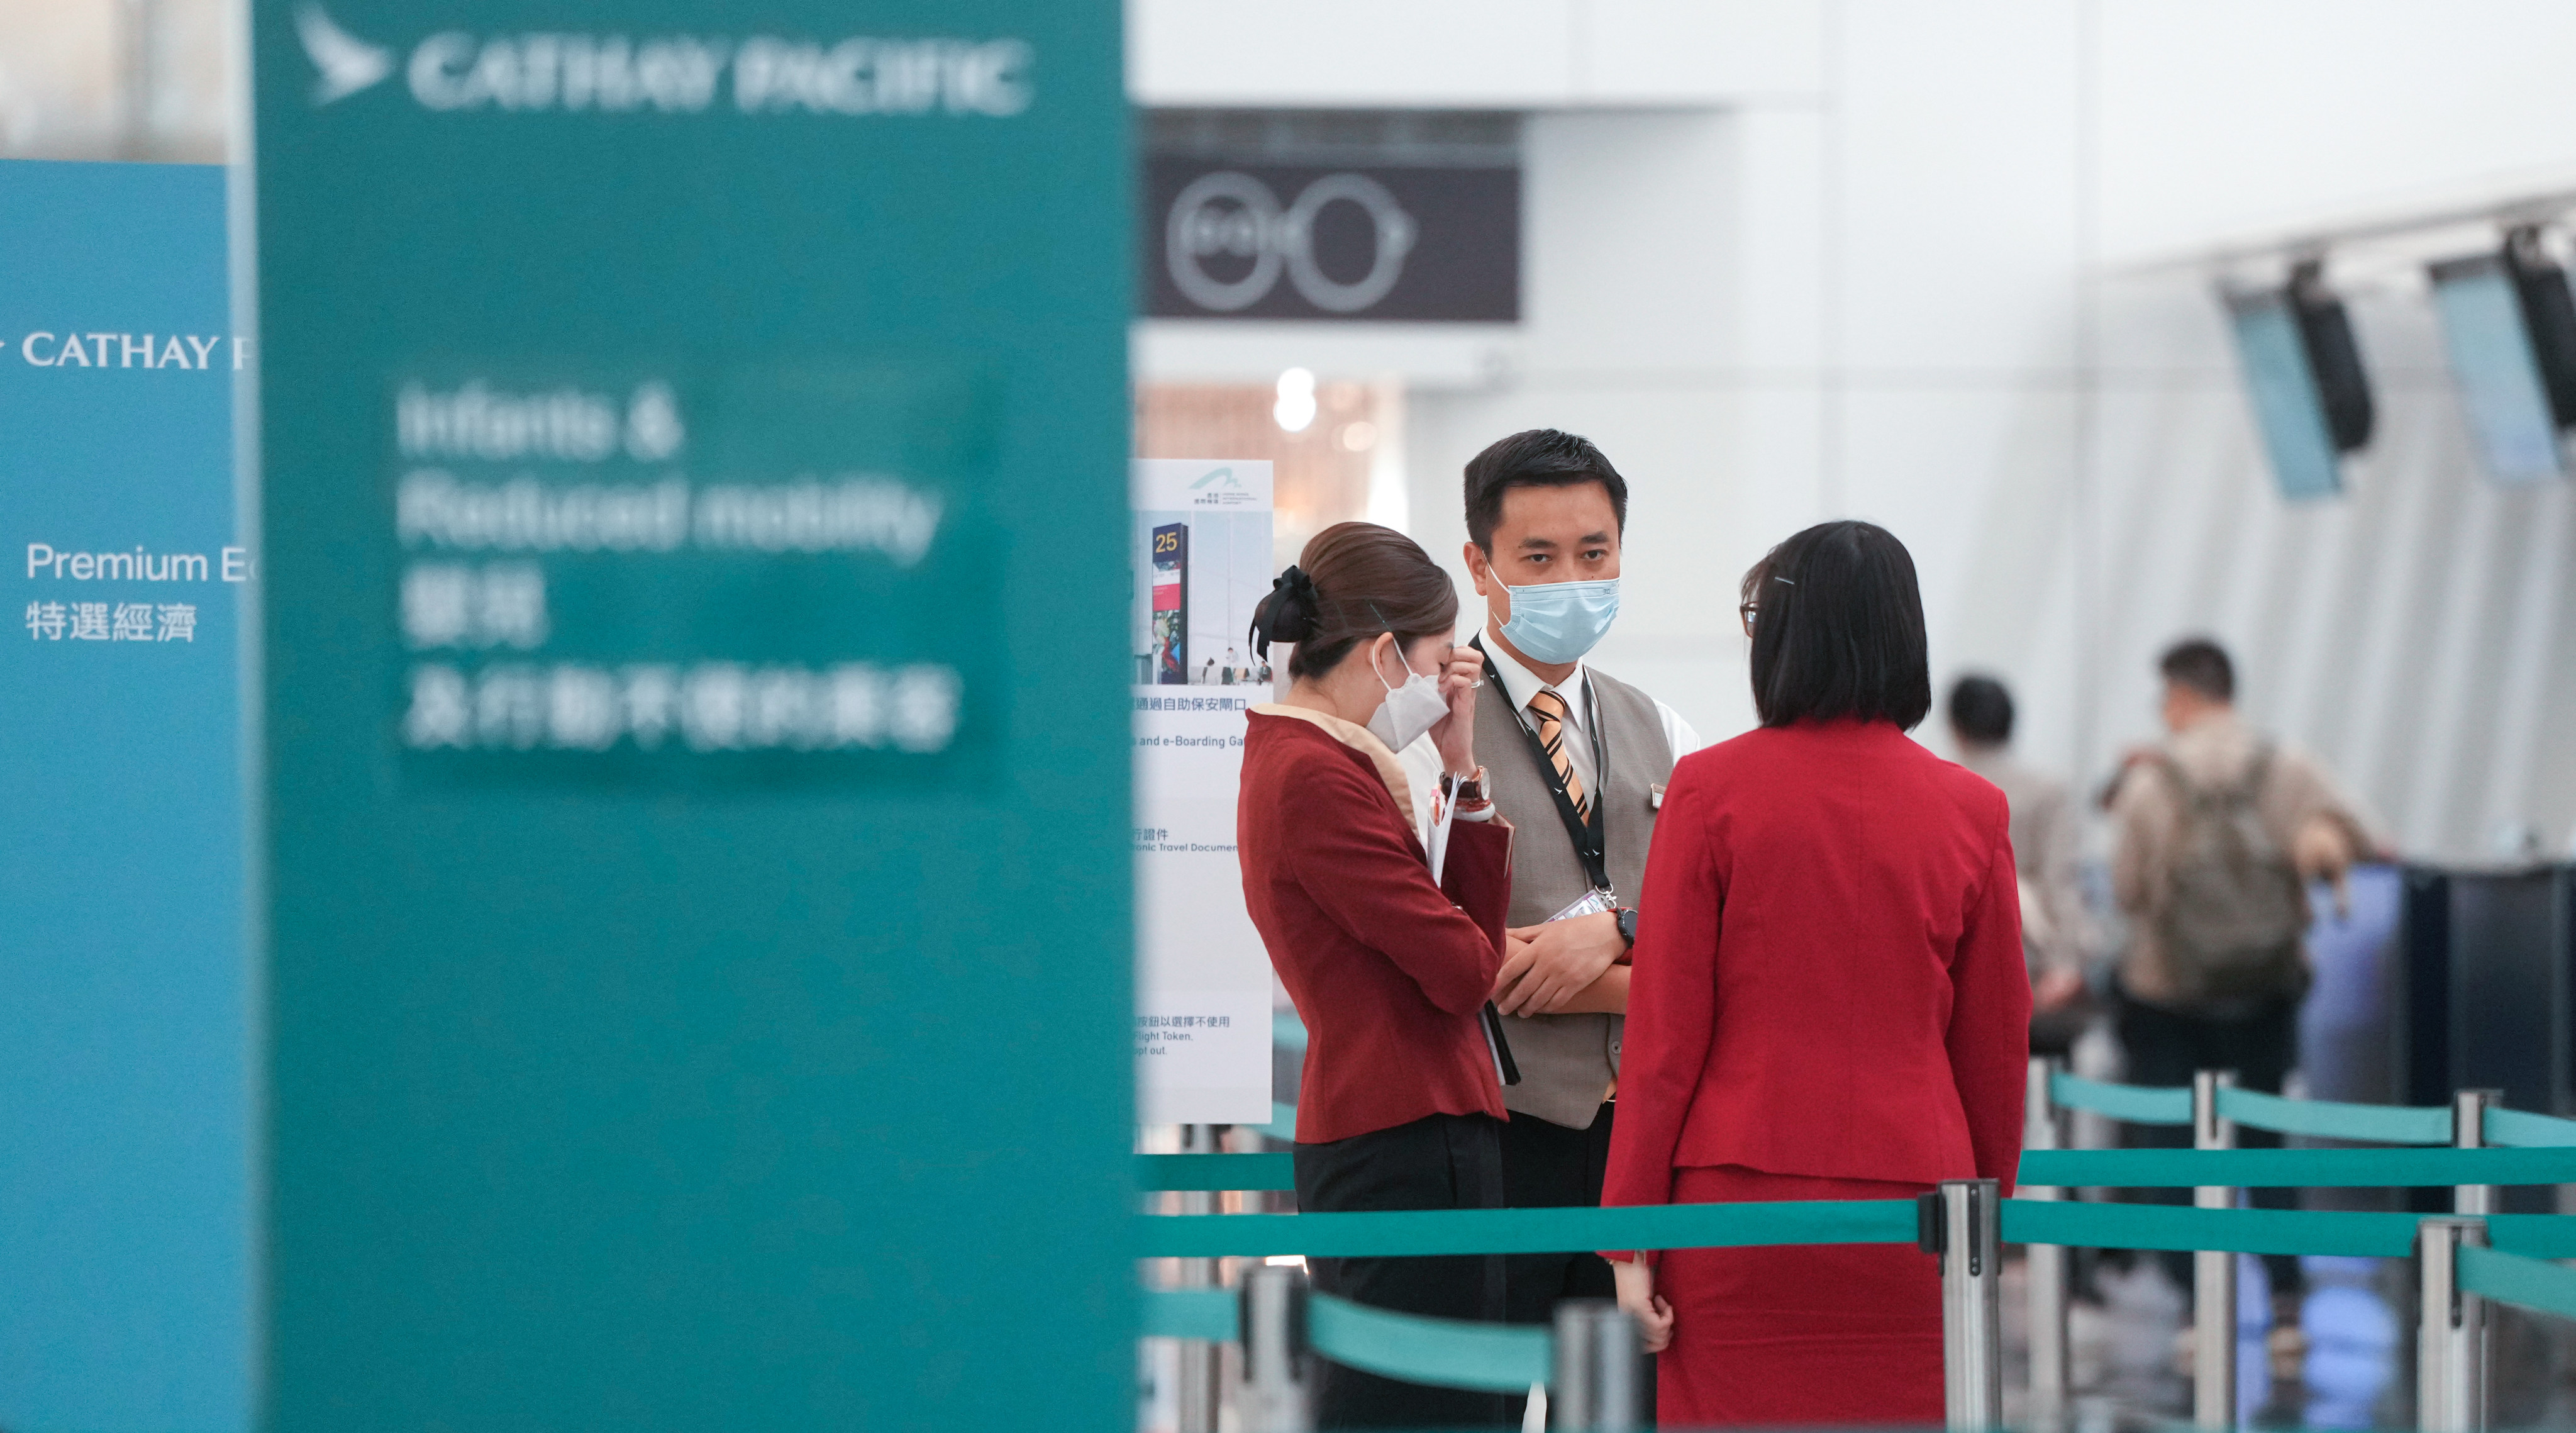 Cathay Pacific Airways staff are seen at Hong Kong International Airport on May 23. The Cathay Flight Attendants’ Union has been criticised for attributing the recent bad behaviour to low morale. Photo: Sam Tsang